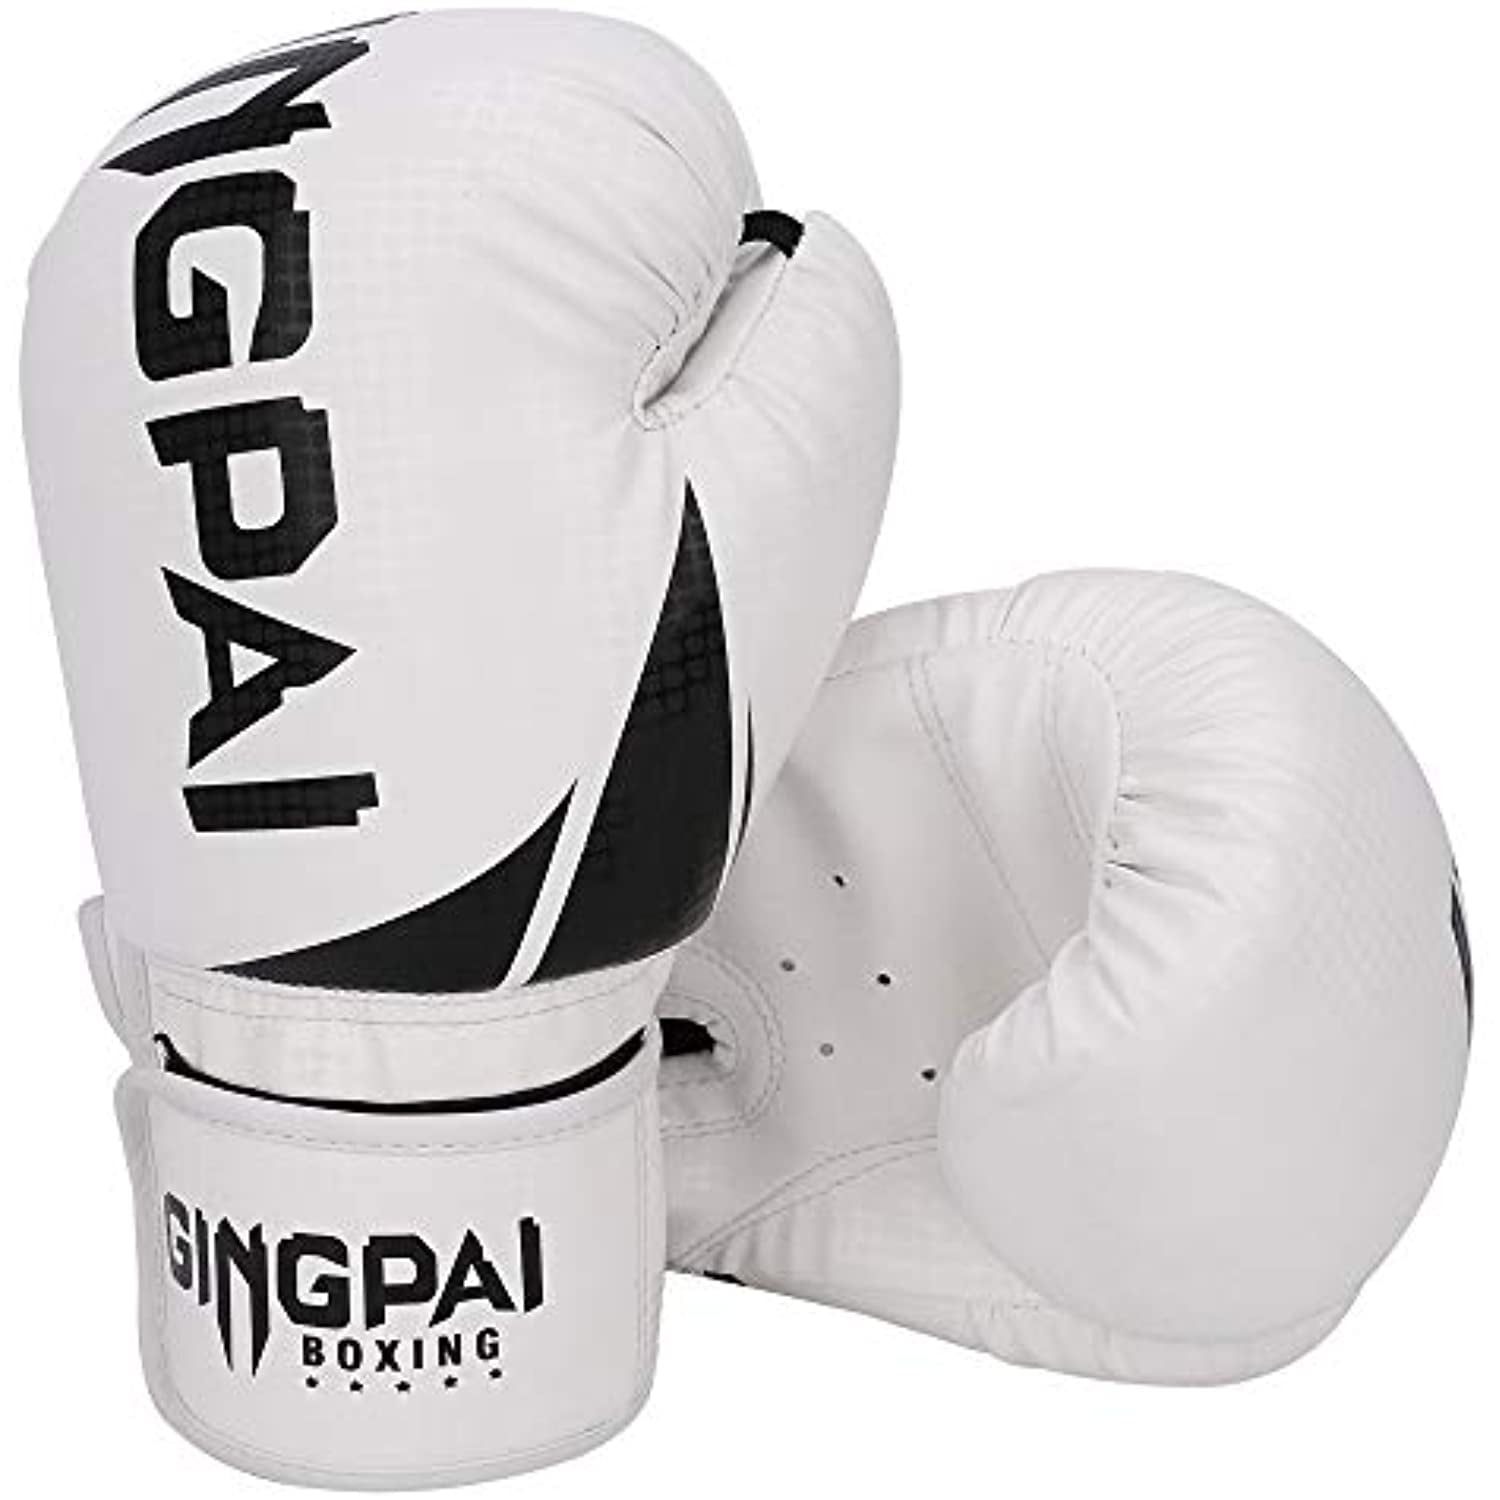 Boxing Mitts Focus Pads Karate 10oz Kickboxing GINGPAI 2-in-1 Boxing Gloves and Punching Mitts Set for Kids MMA Training Muay Thai Kids Boxing Gloves for Boxing